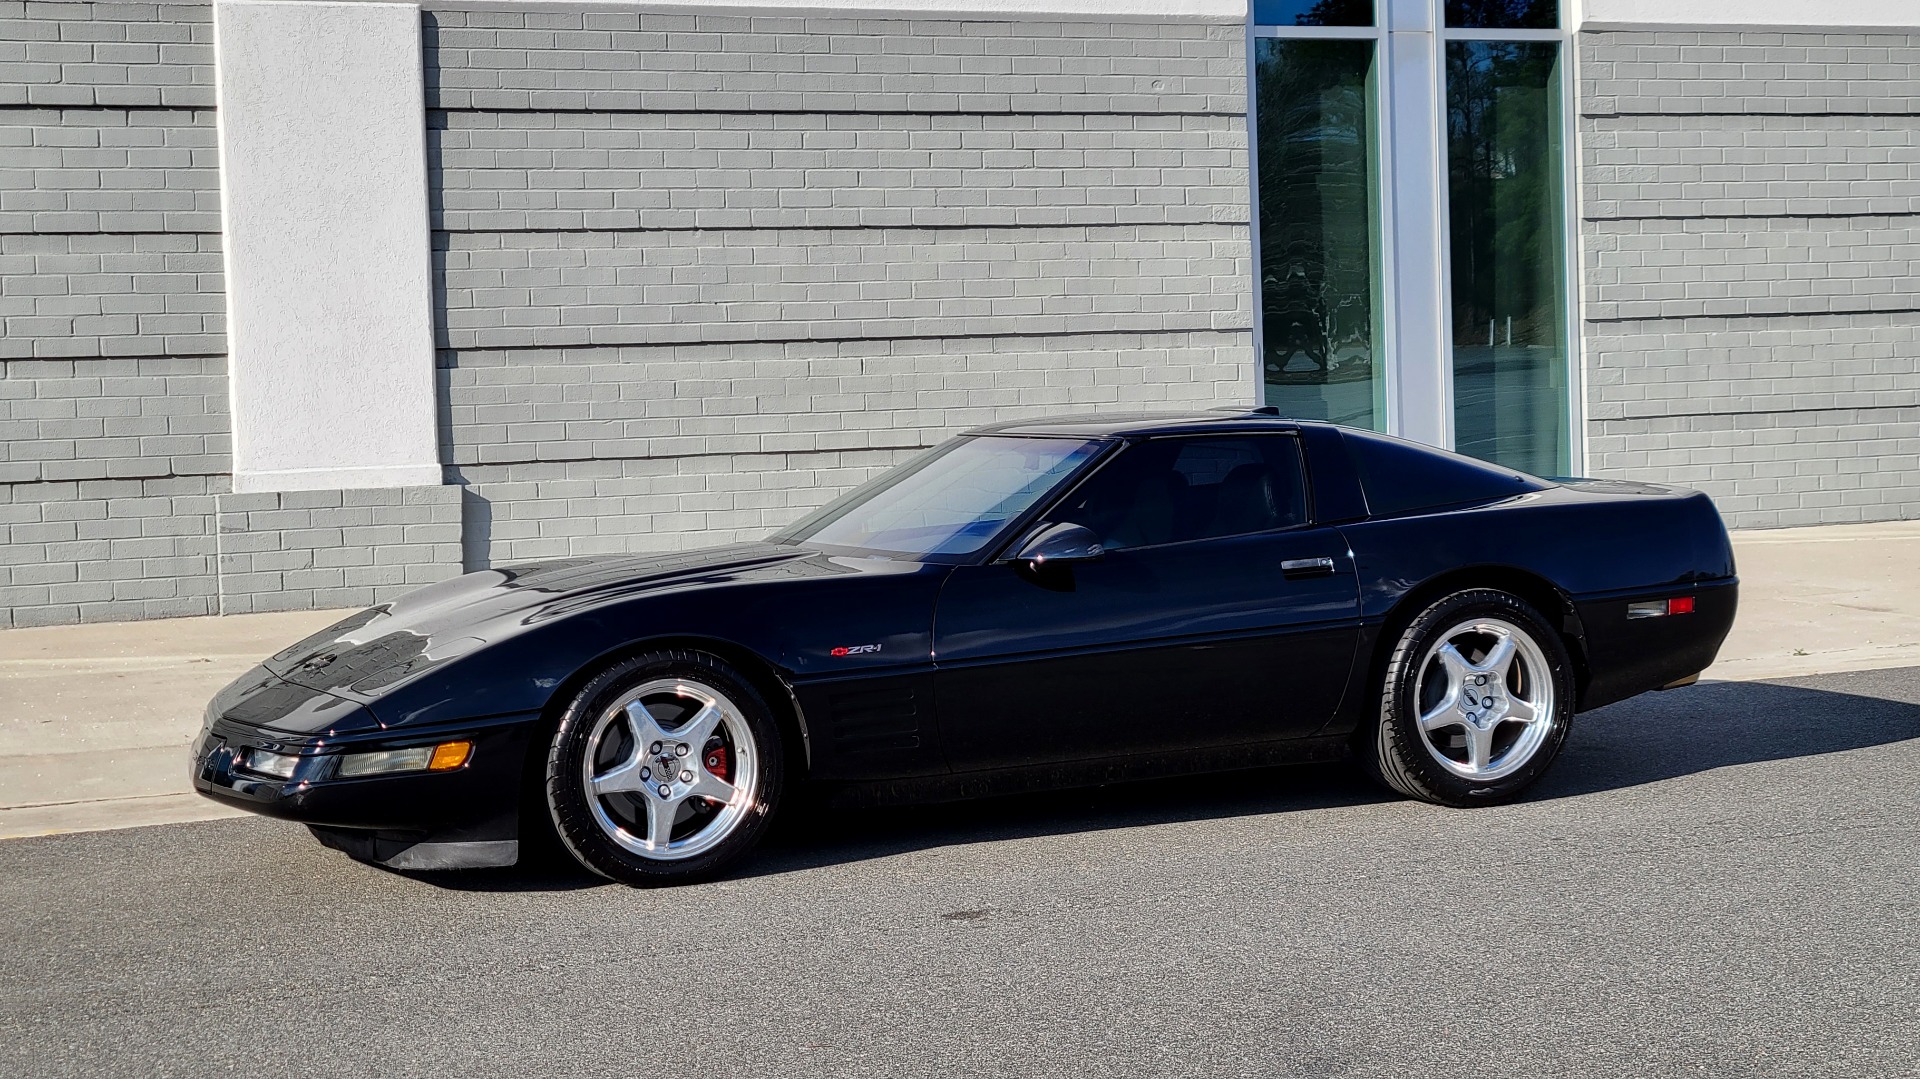 Used 1994 Chevrolet CORVETTE ZR1 COUPE (405HP+) / 6-SPEED MANUAL / 2-TOPS / LOW MILES for sale $49,995 at Formula Imports in Charlotte NC 28227 6